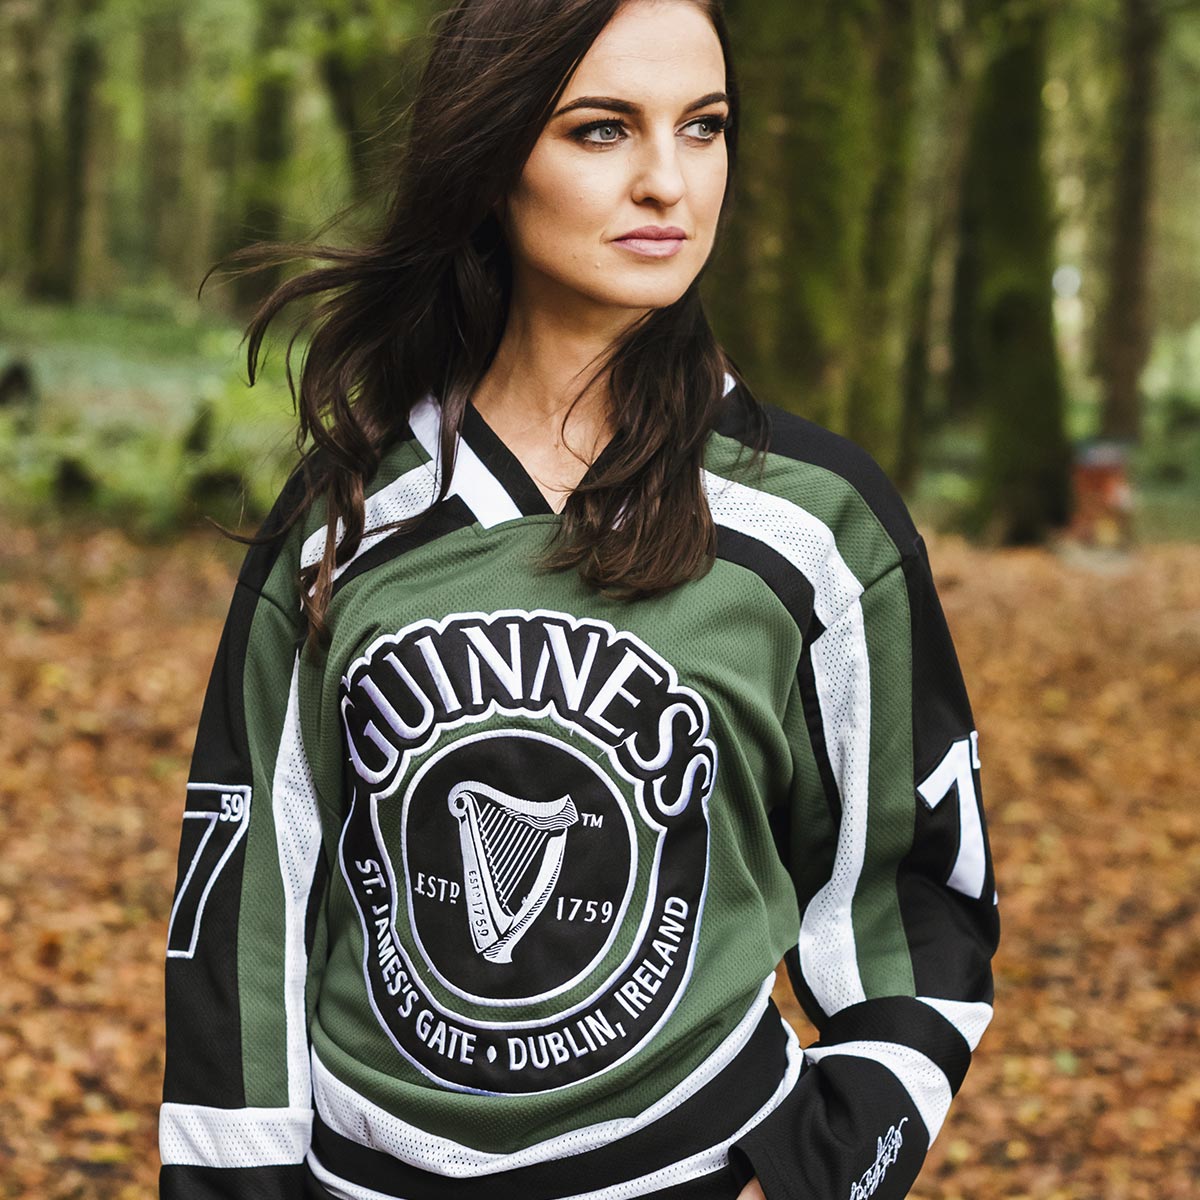 A woman wearing a Guinness Green & White Hockey Jersey poses in the woods.